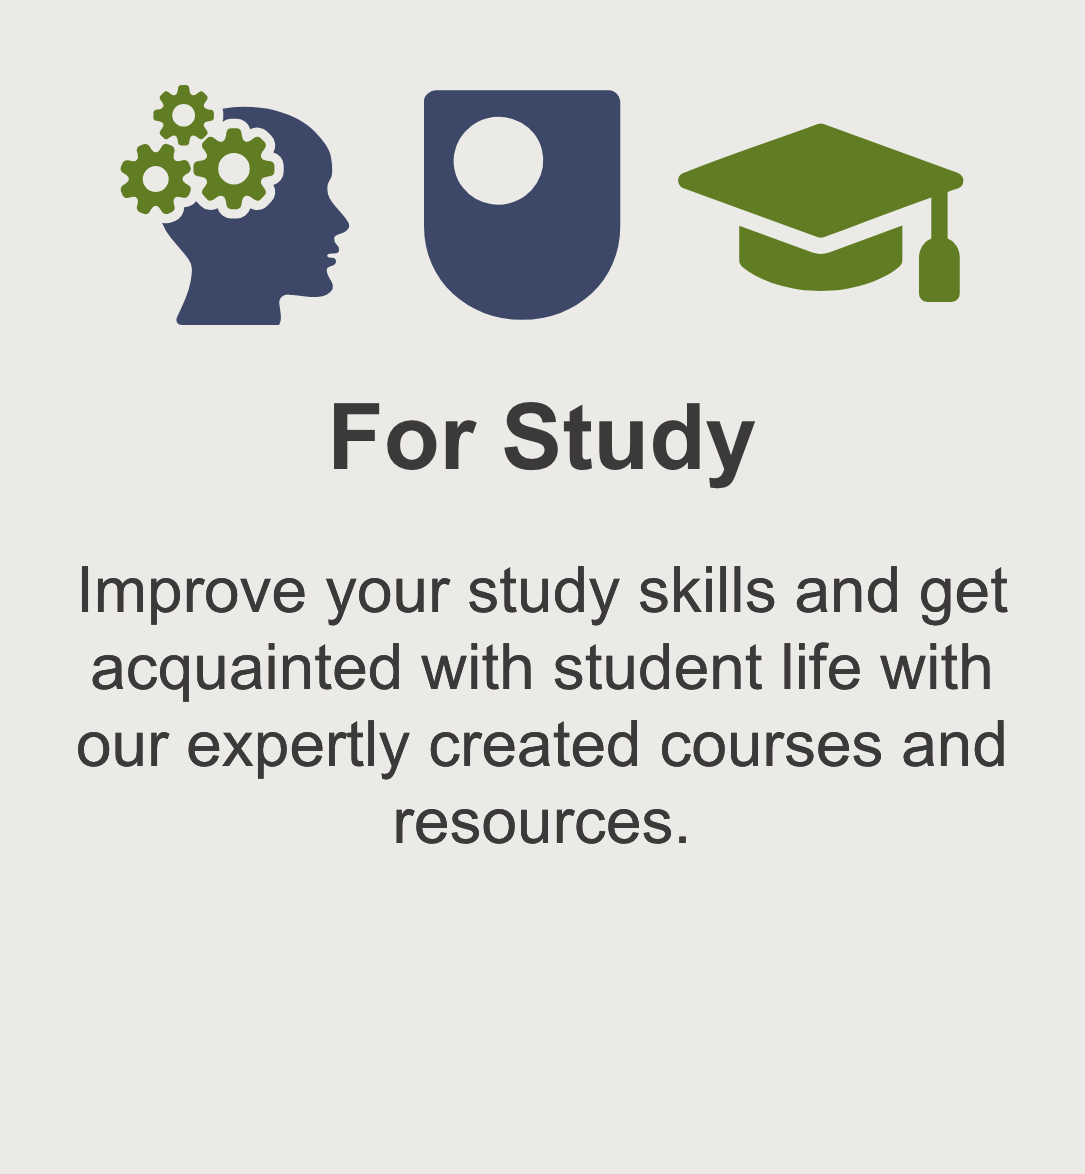 An infographic highlighting the benefits of OpenLearn for studying.